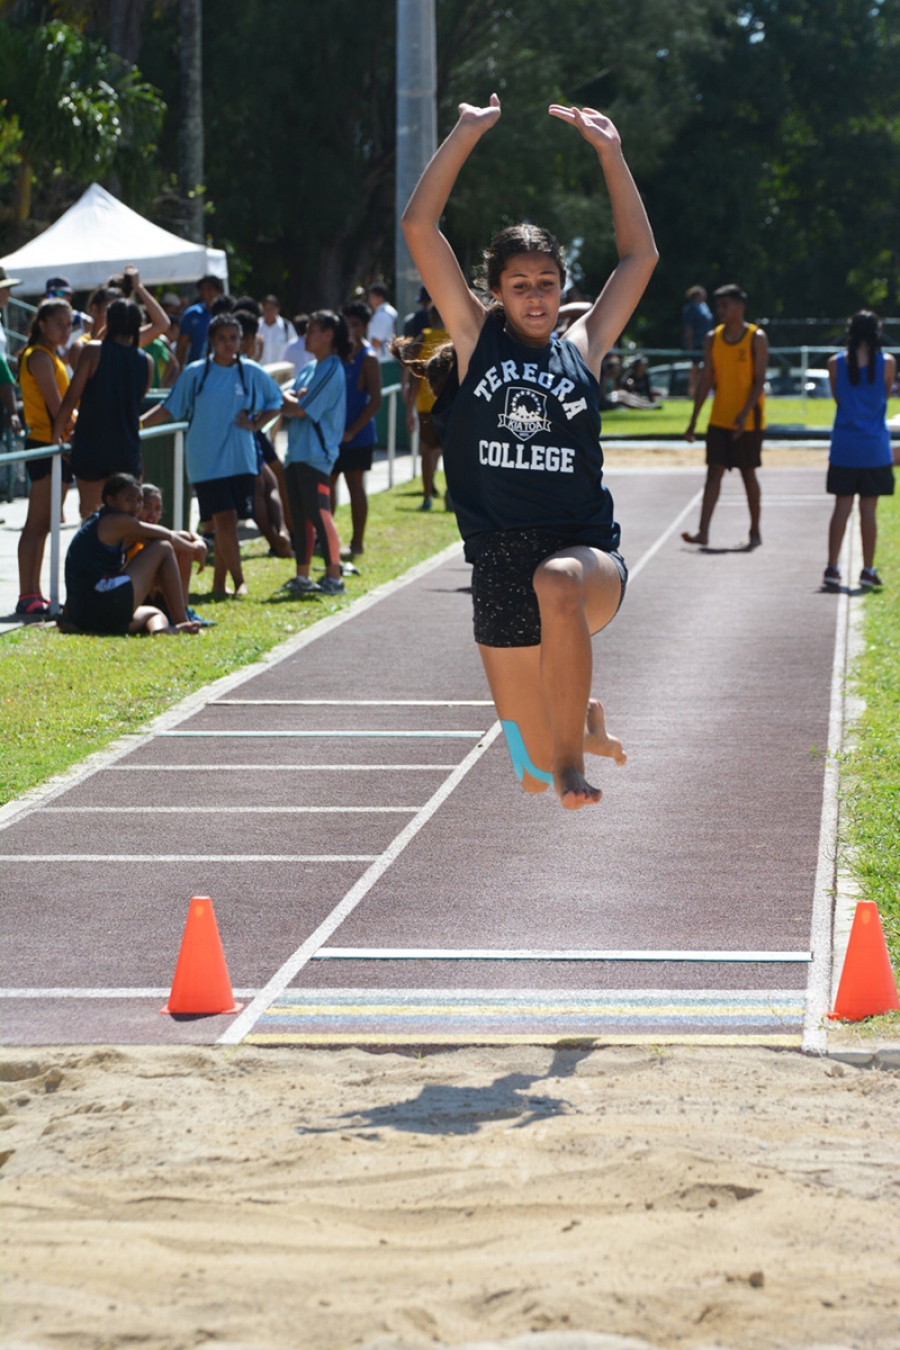 Pathways set for track and field stars